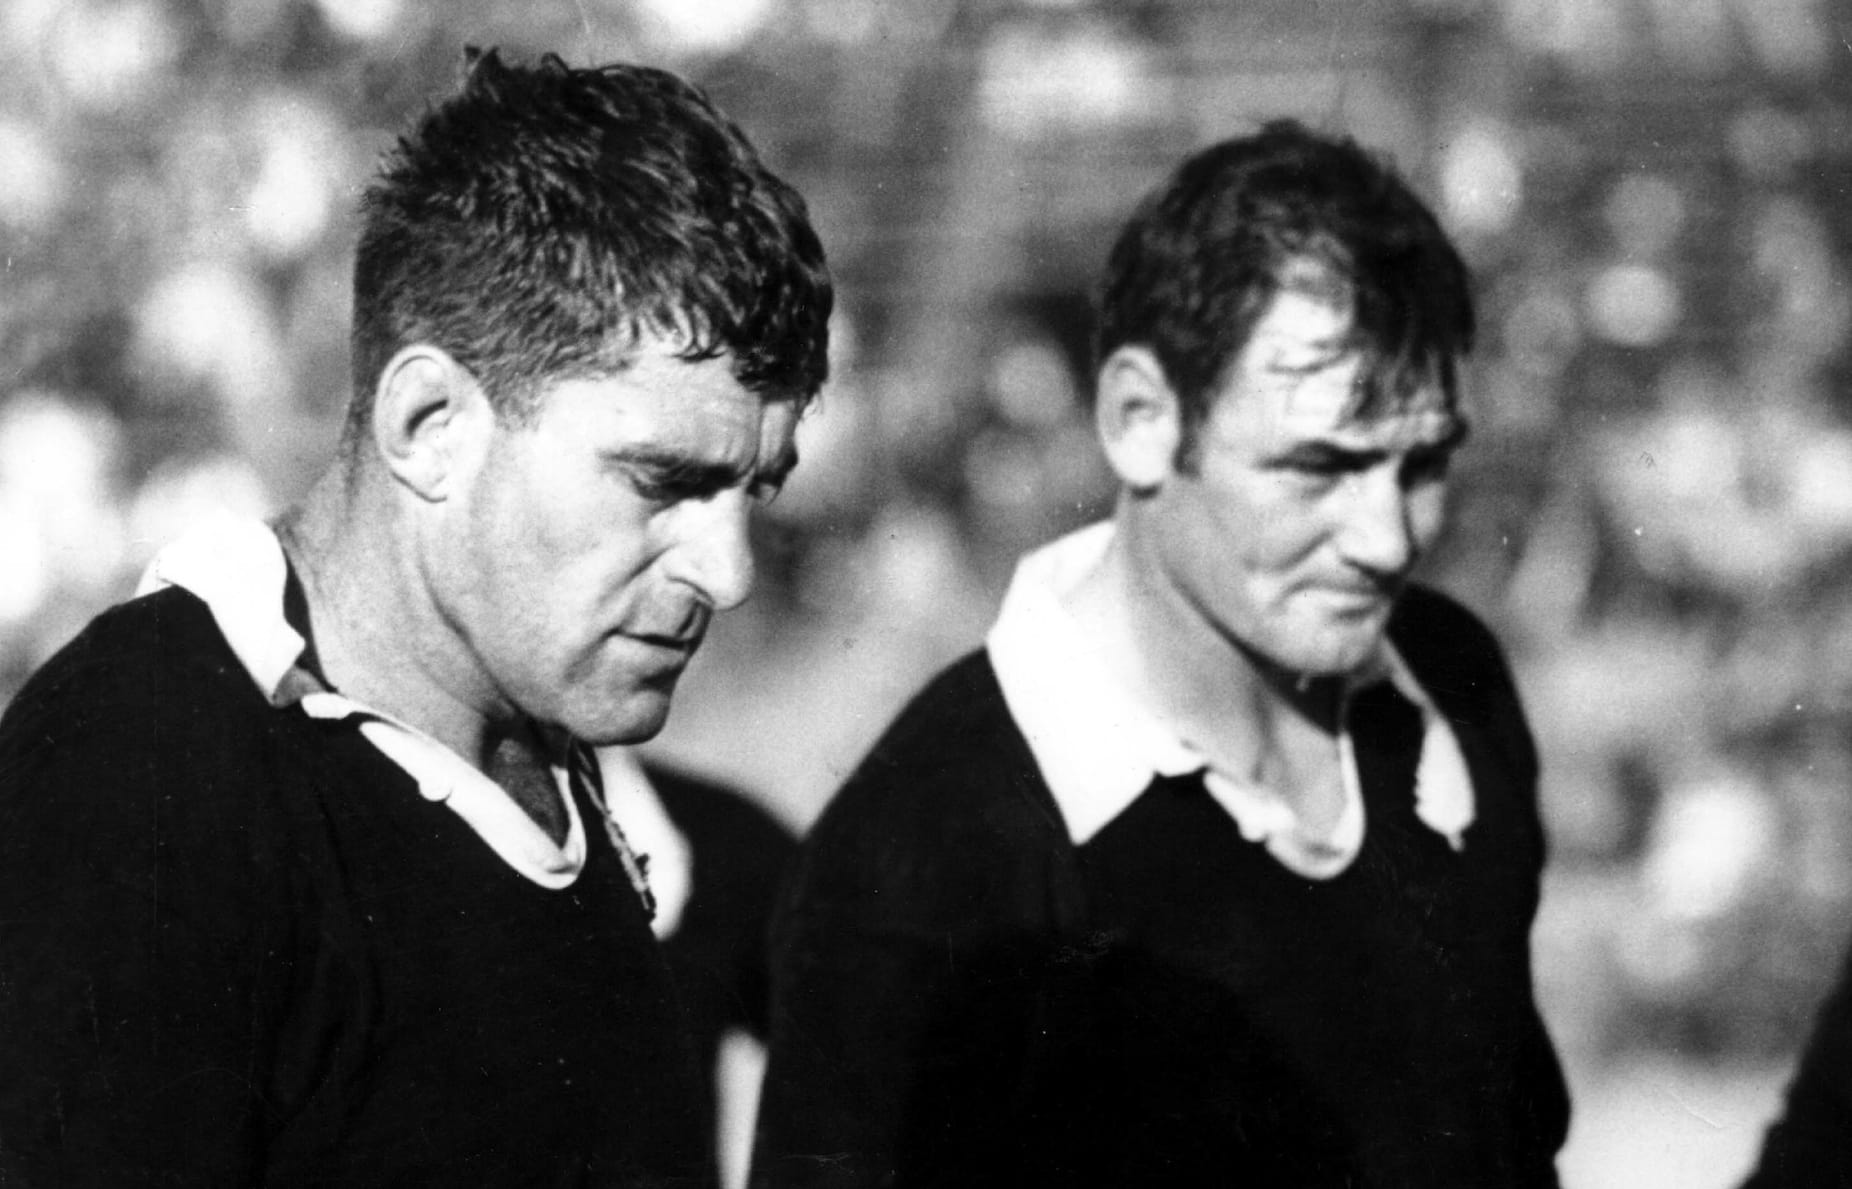 Colin Meads and Brian Lochore during a game between the All Blacks and Eastern Transvaal in 1970, location unknown.